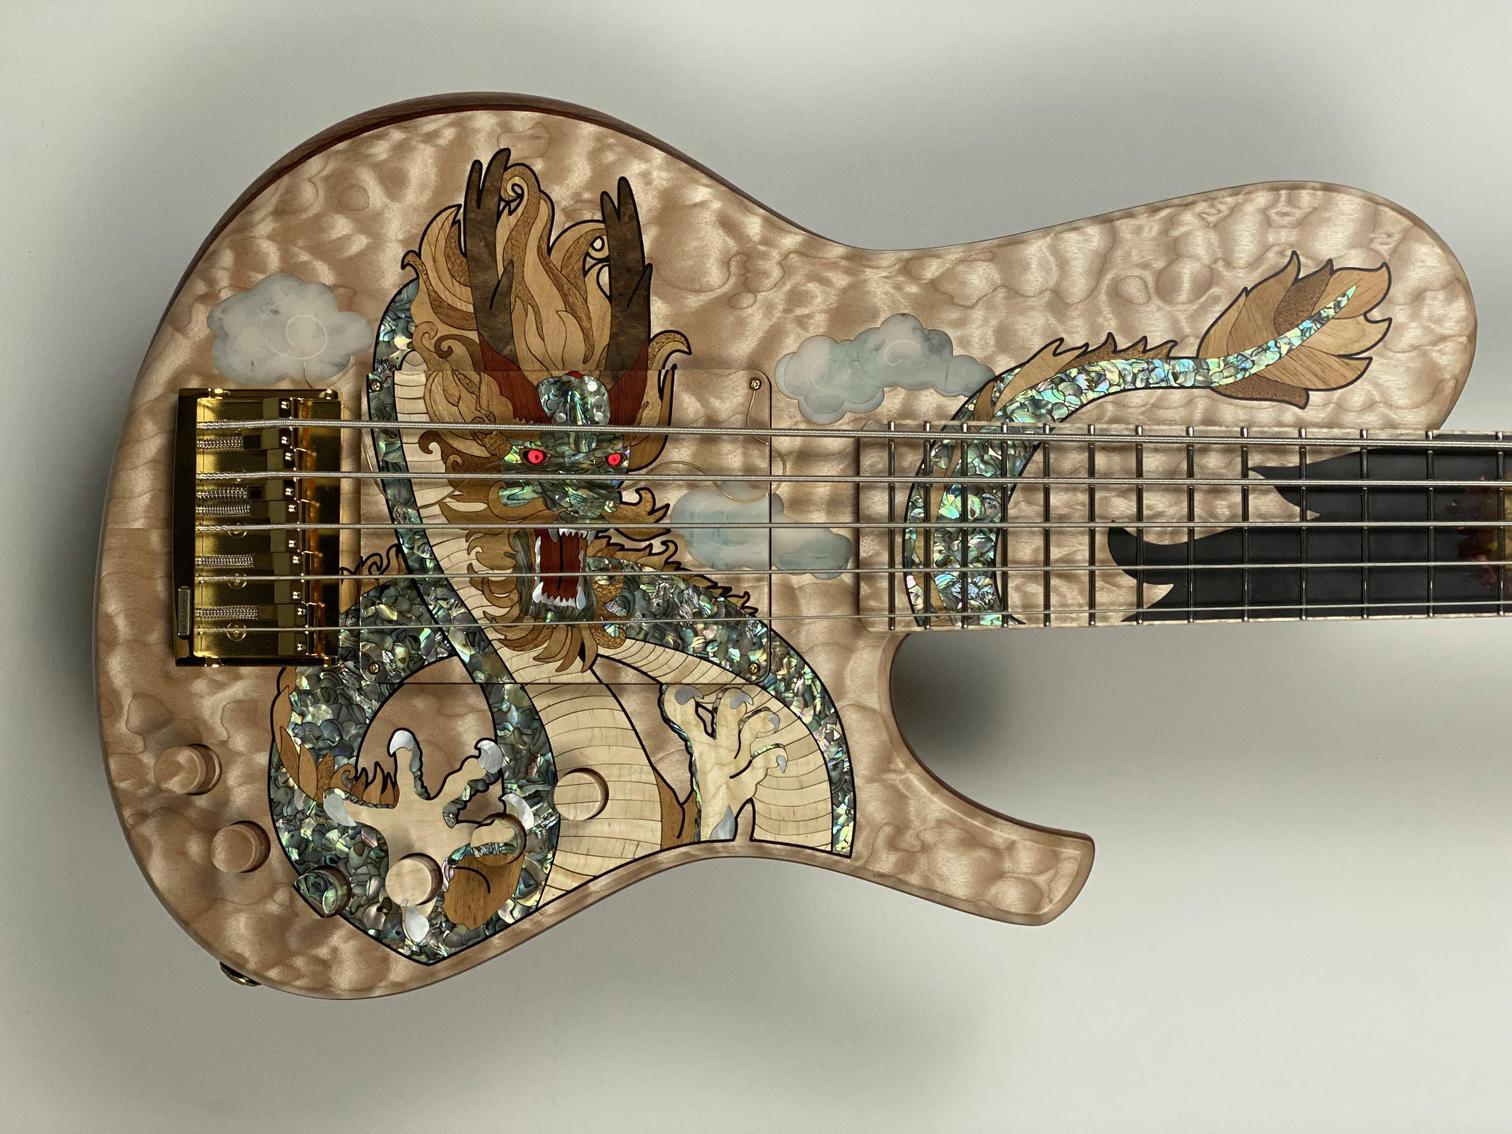 Discovering Dtc - Custom Bass Guitar luthier from China